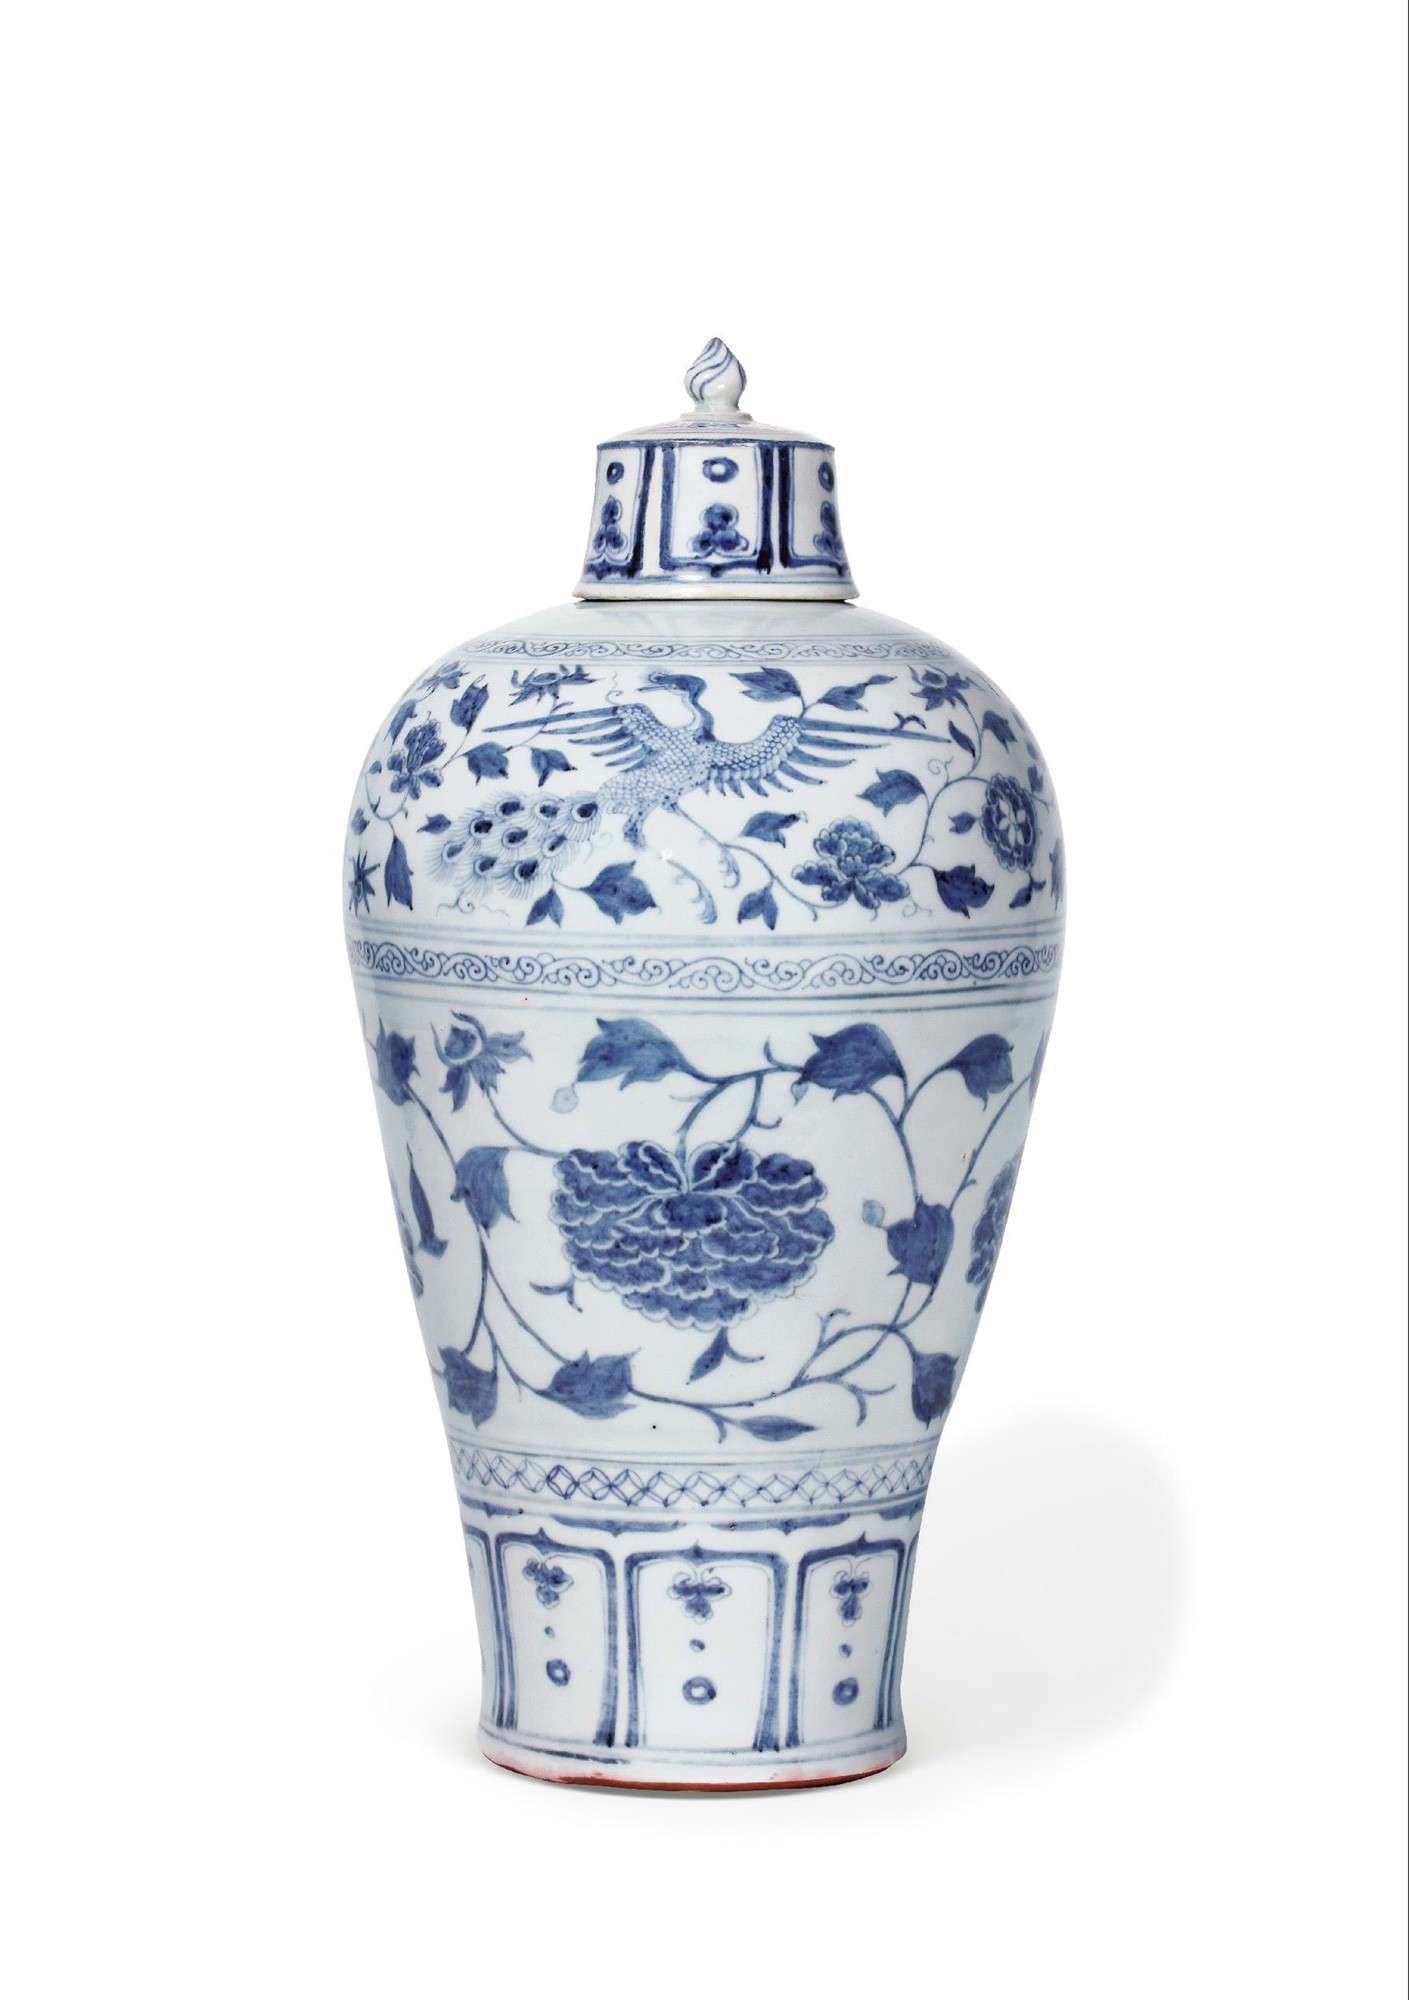 A VERY RARE AND LARGE BLUE AND COVERED VASE WITH DESIGN OF PEACOCK AND INTERLOCKING PEONY